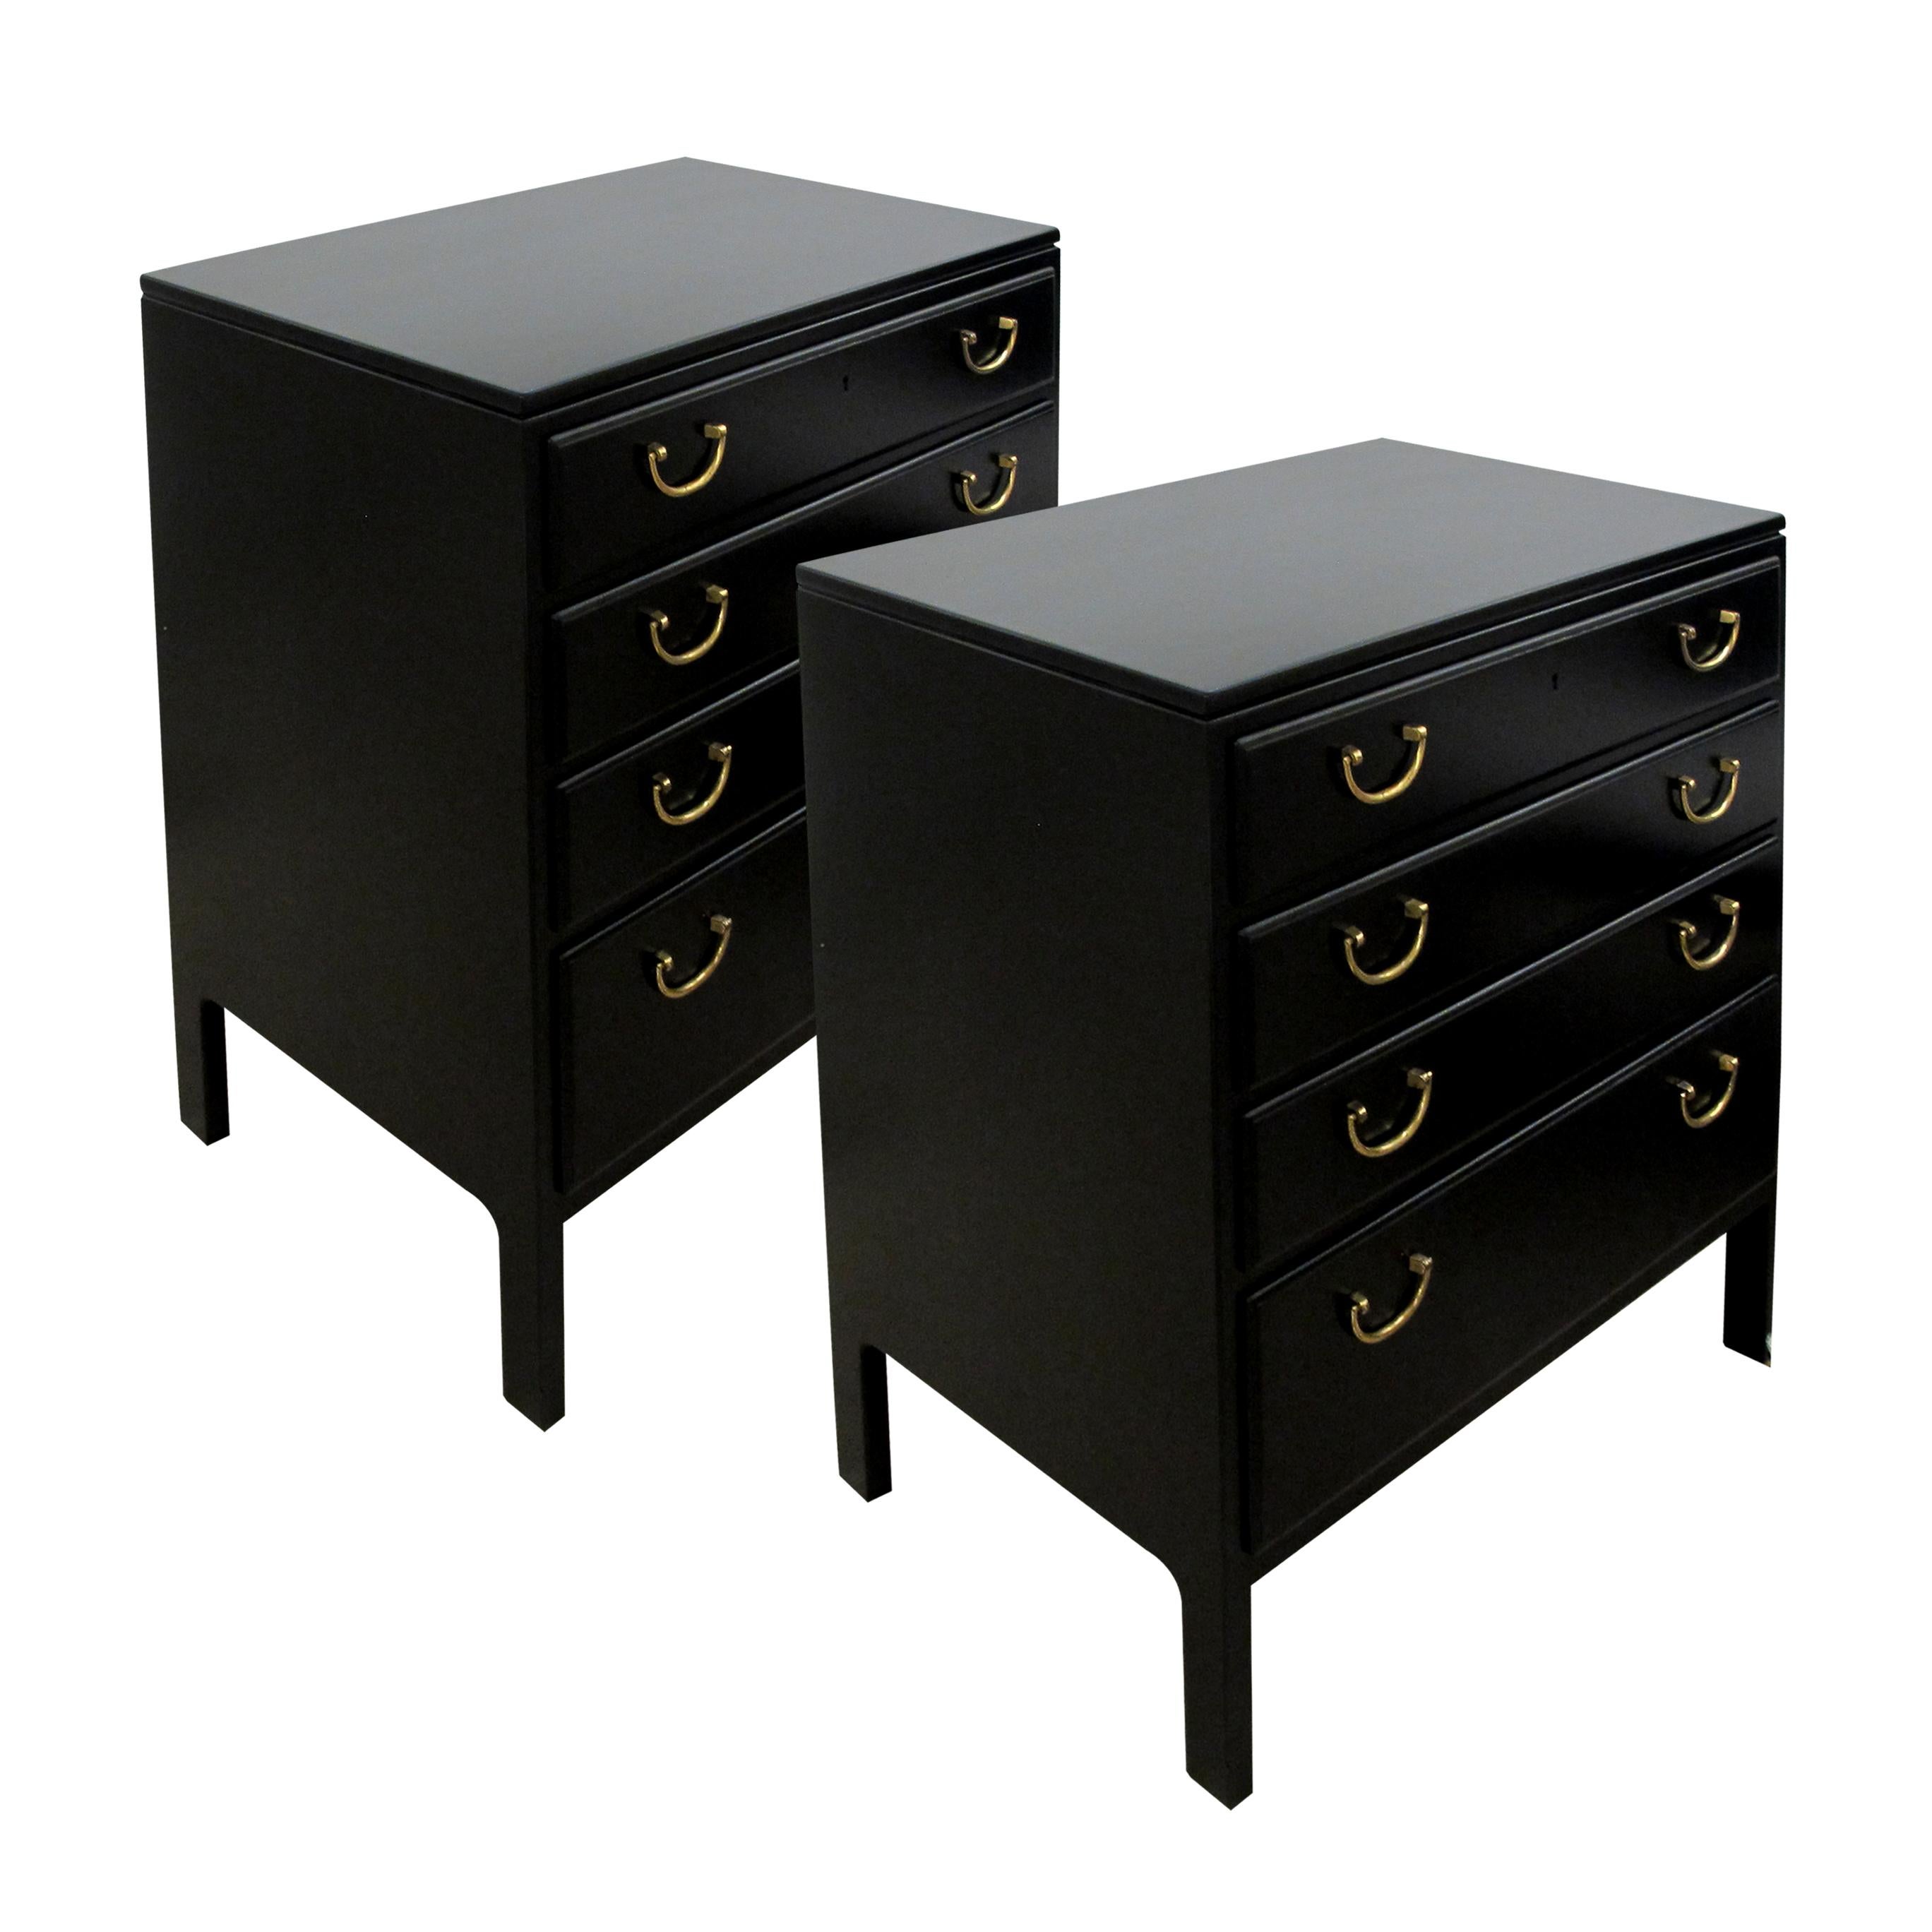 Mid-20th Century Pair of 1950s Swedish Ebonised Chest of Drawers by David Rosen for Bodafors